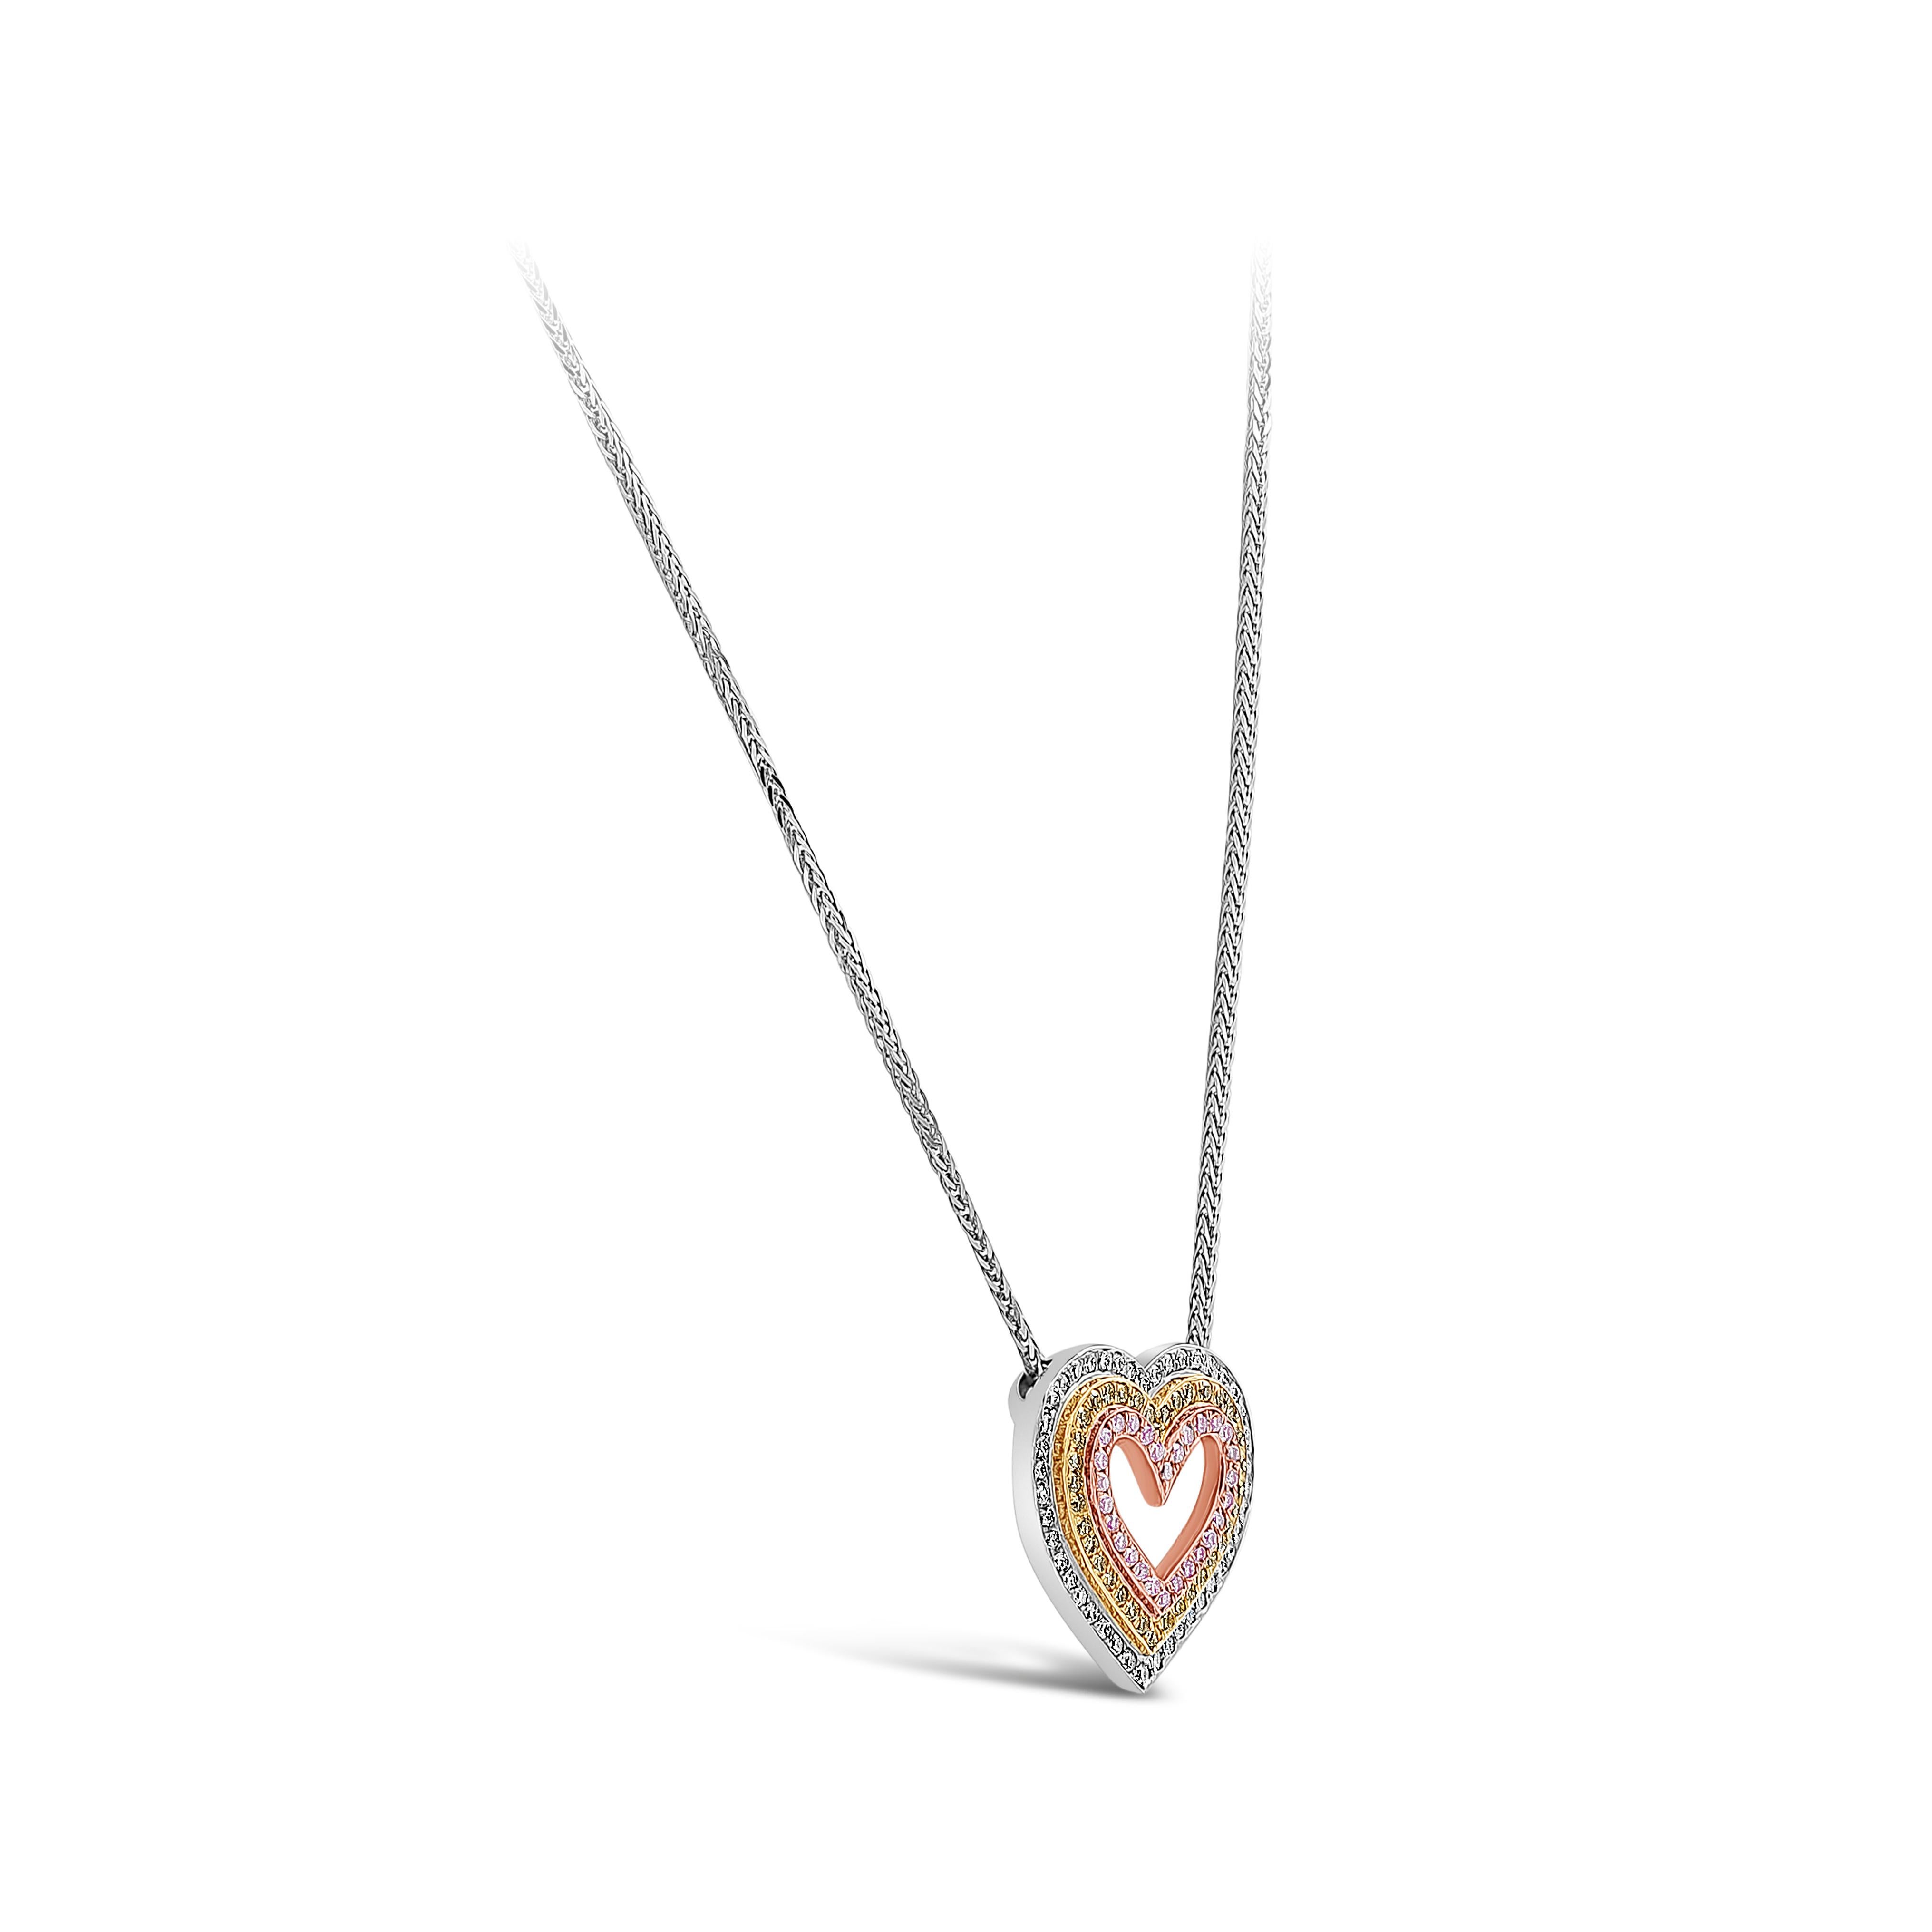 Showcasing a unique heart shape pendant necklace set with three rows of round brilliant diamonds; each row is set with a vibrant color Pink, Yellow, or white diamonds. . Suspended on an 18 inch adjustable platinum chain. Intense pink diamonds weigh